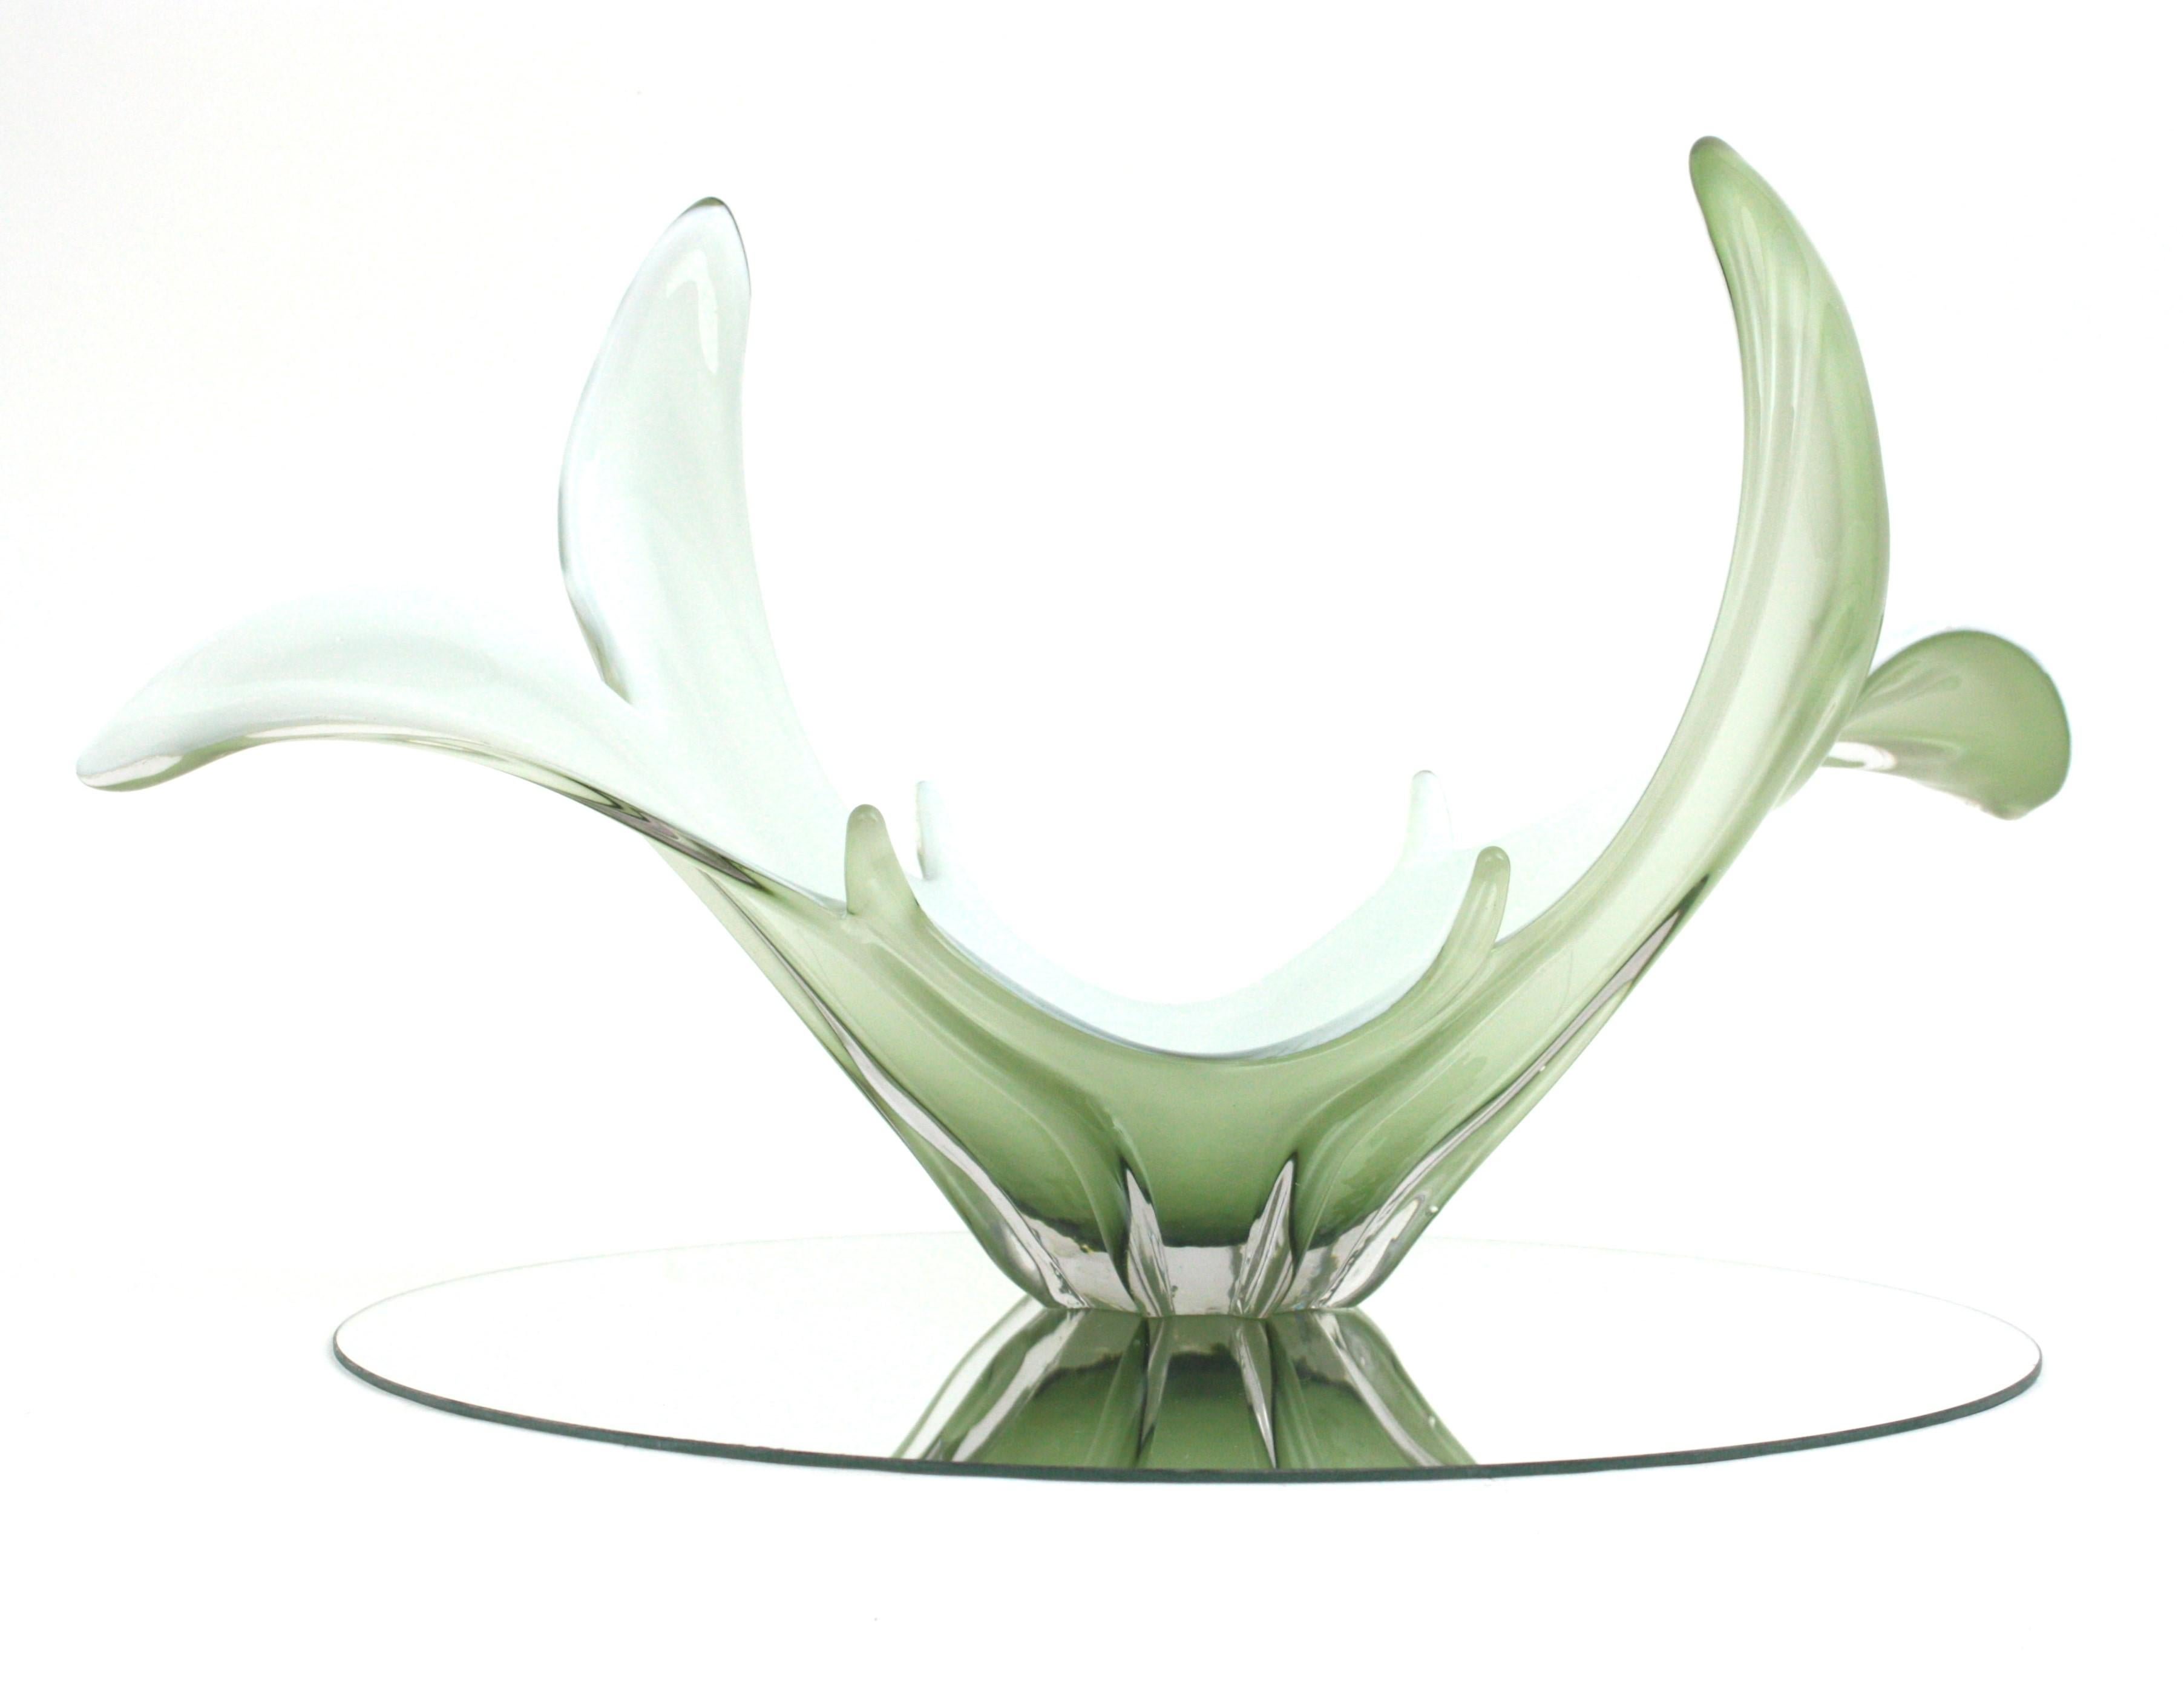 A highly decorative hand blown pale green and white Murano glass centerpiece / vase with organic design. Italy, 1960s
Pale green glass cased into clear glass. The interior part is made in white opaline glass.
It will be a nice choice for an urban